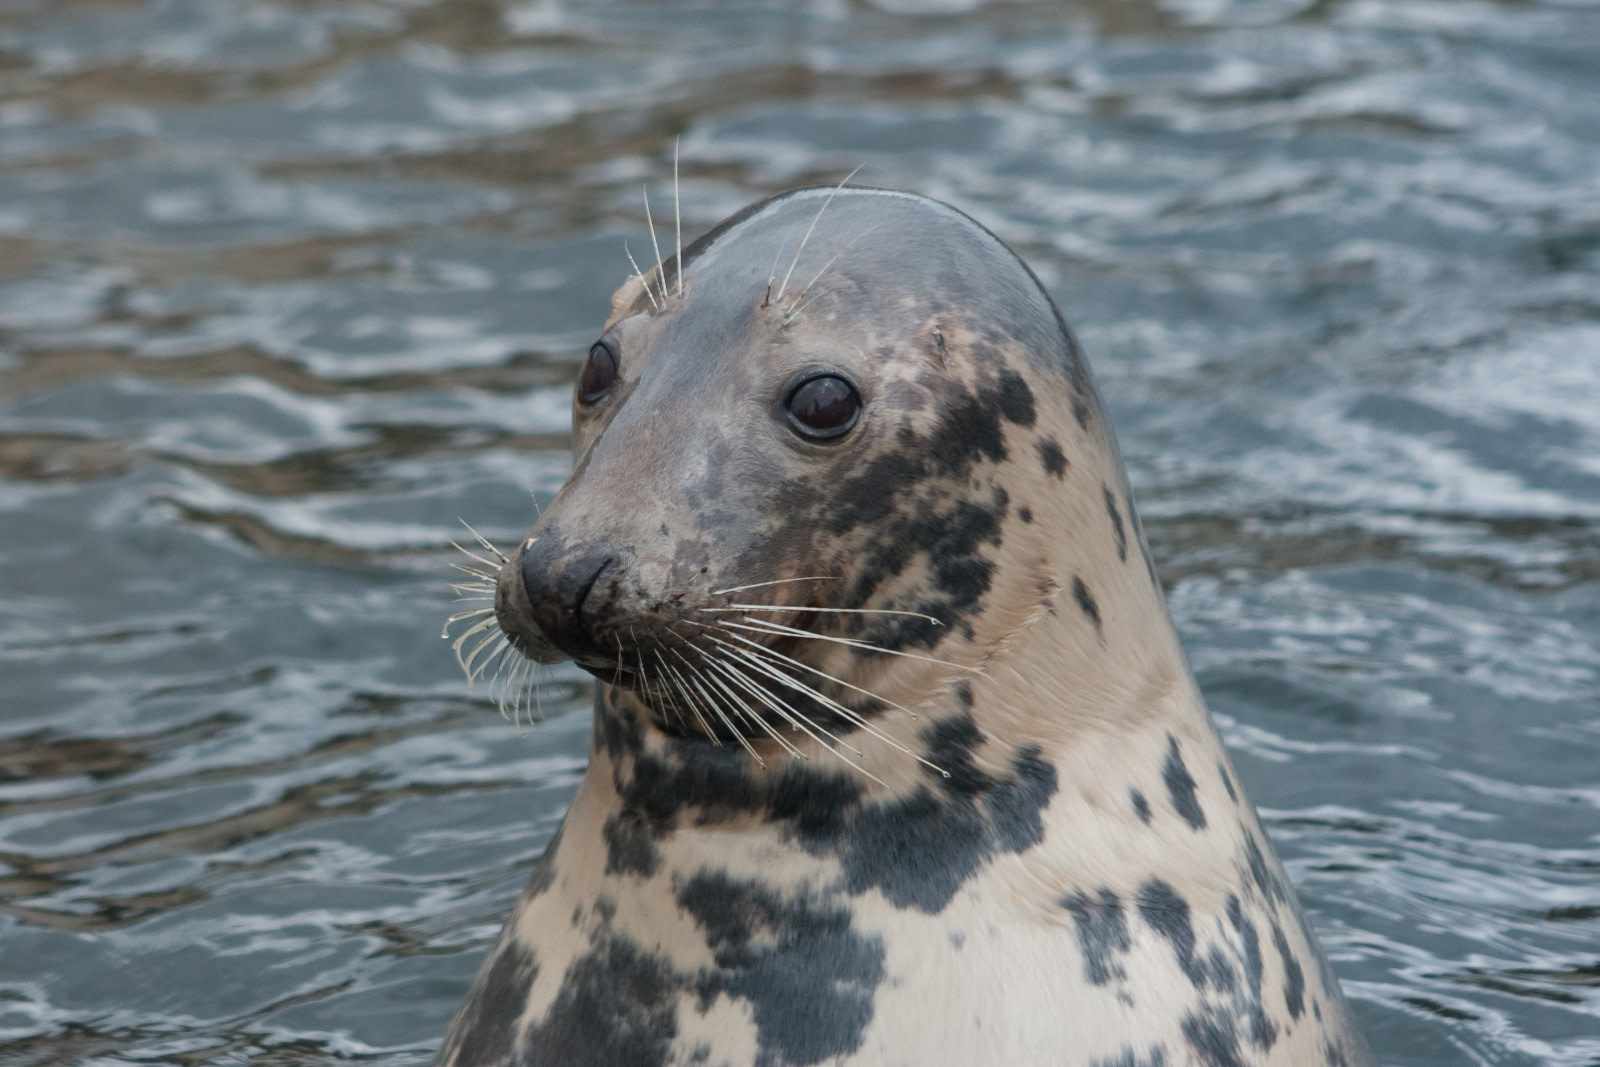 Gray Seal. Facts, picture & more about Gray Seal